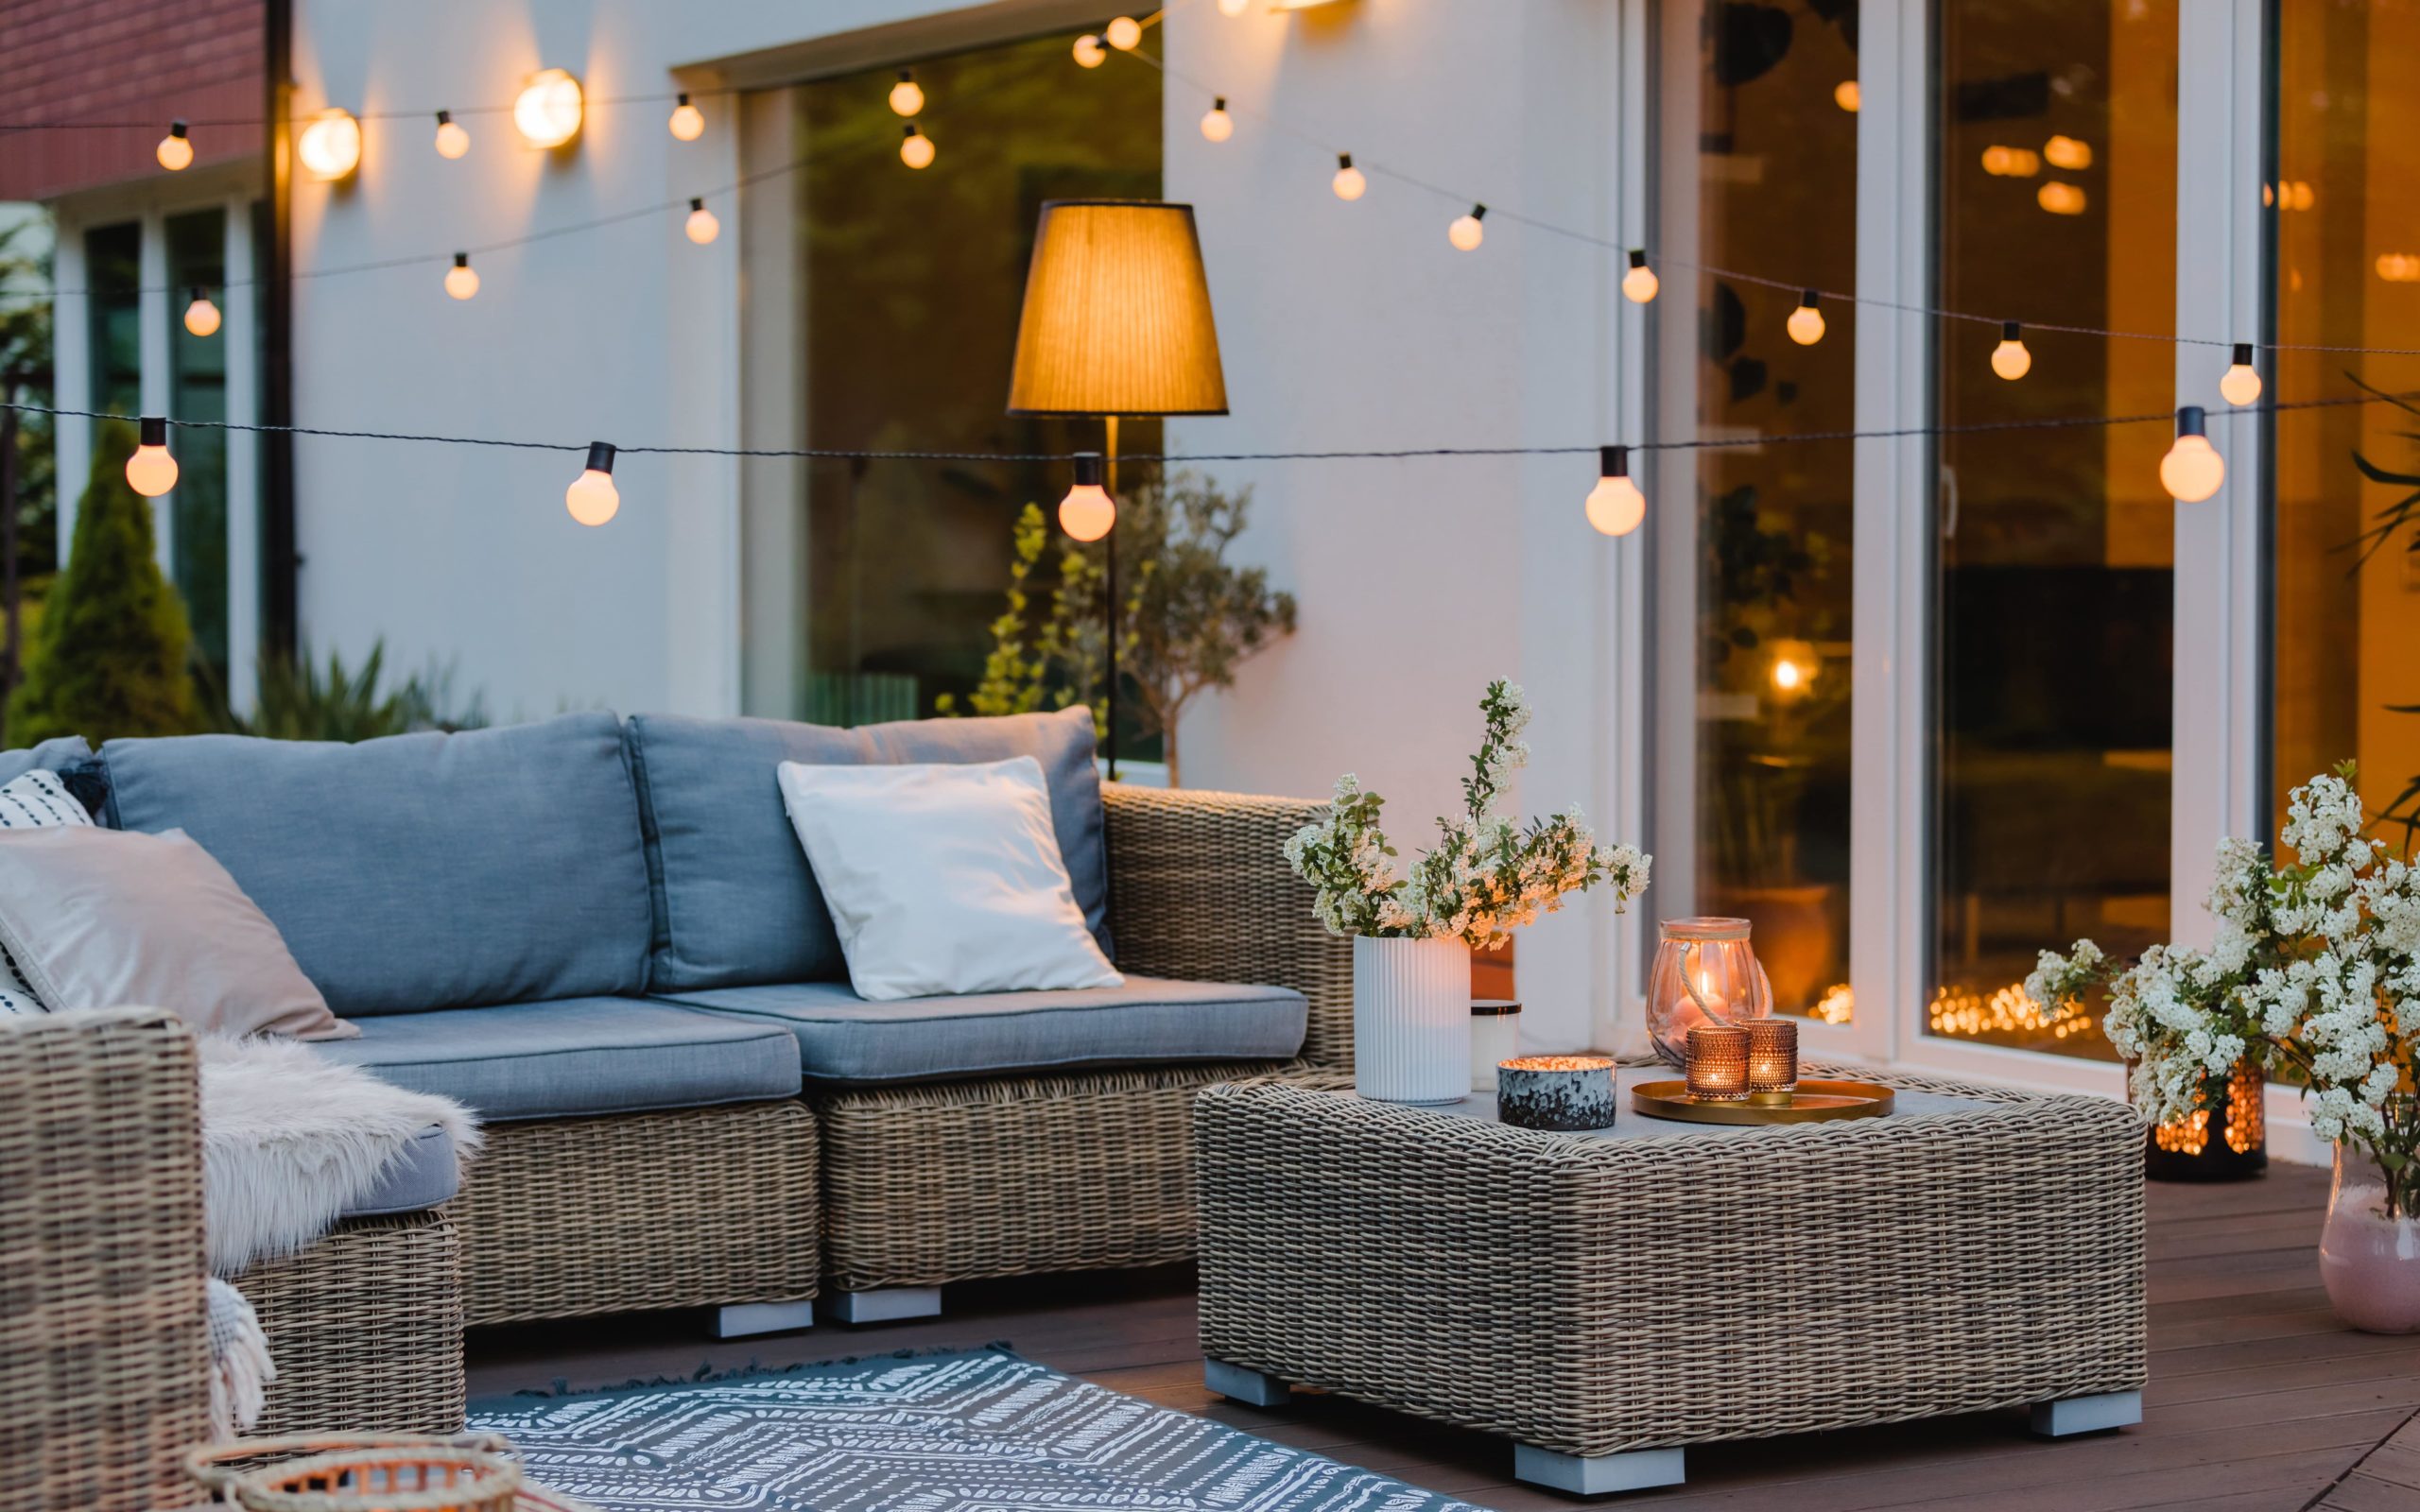 outdoor patio with furniture and string lights